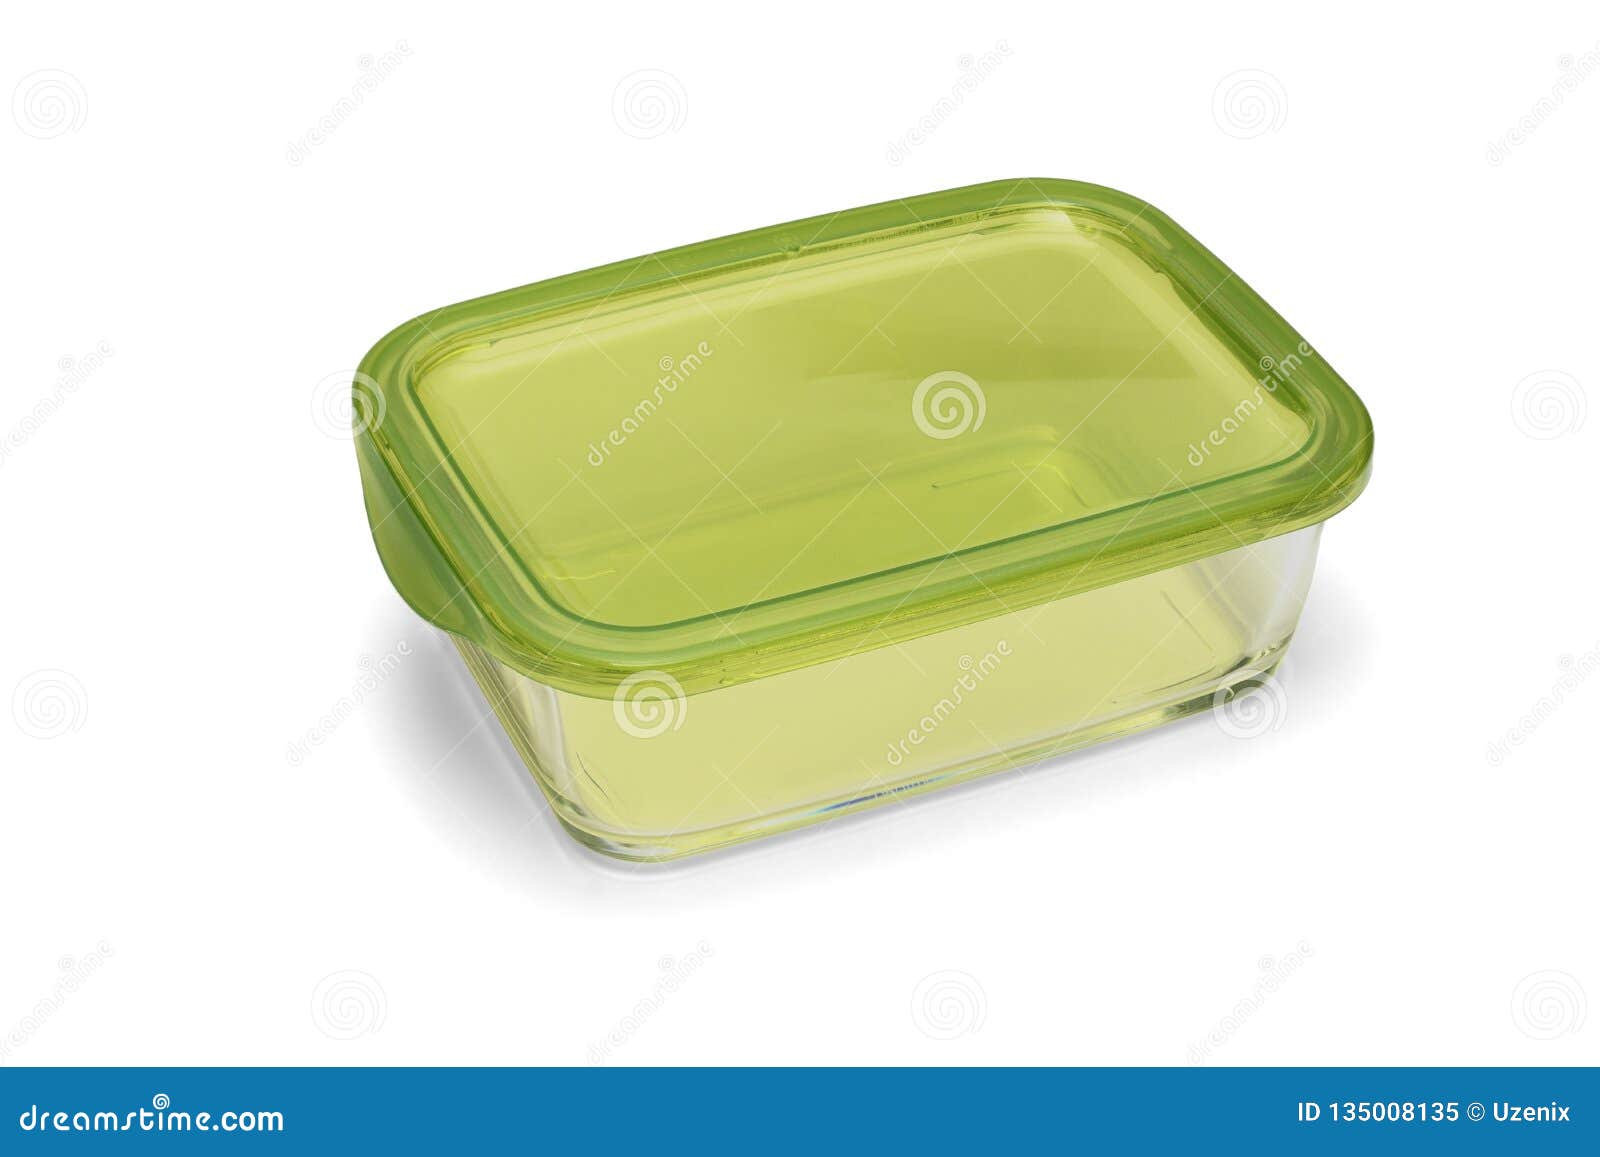 Glass Tray With A Plastic Cover For Food On A White